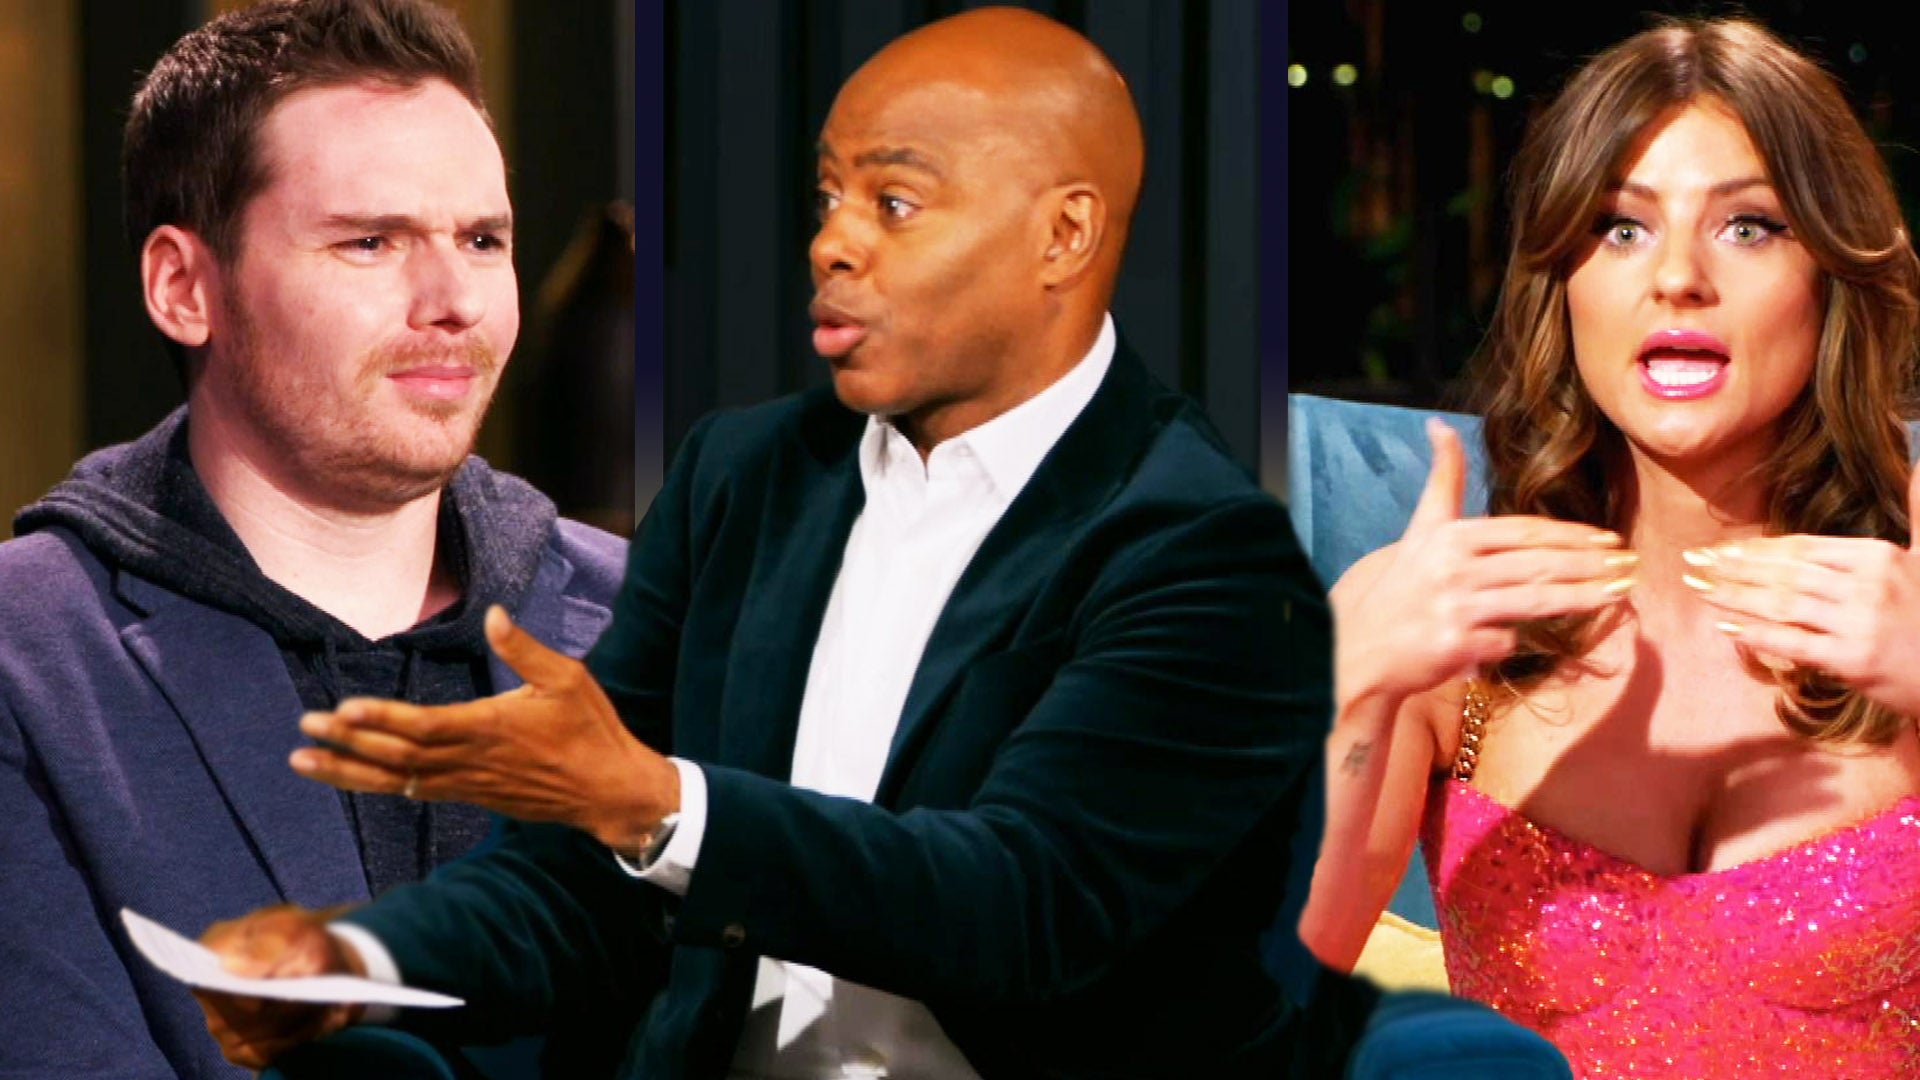 'Married at First Sight' Host Kevin Frazier CALLS OUT Contestants